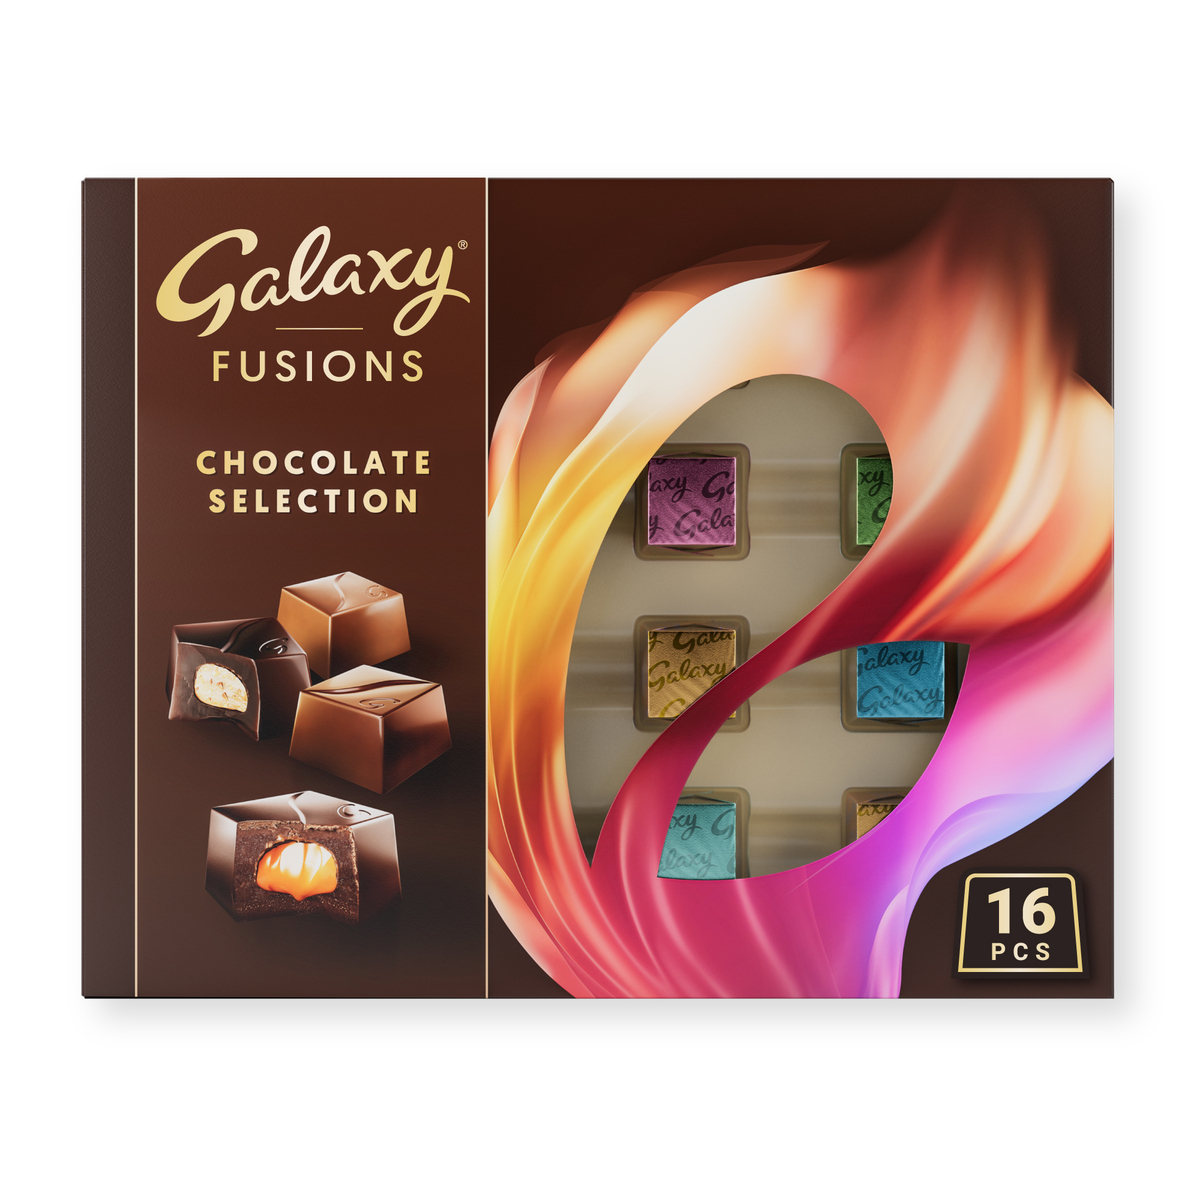 Buy Galaxy Fusions Chocolate Selection 16 pcs 180.8 g Online at Best Price | Food Fest Grocery | Lulu Kuwait in Kuwait